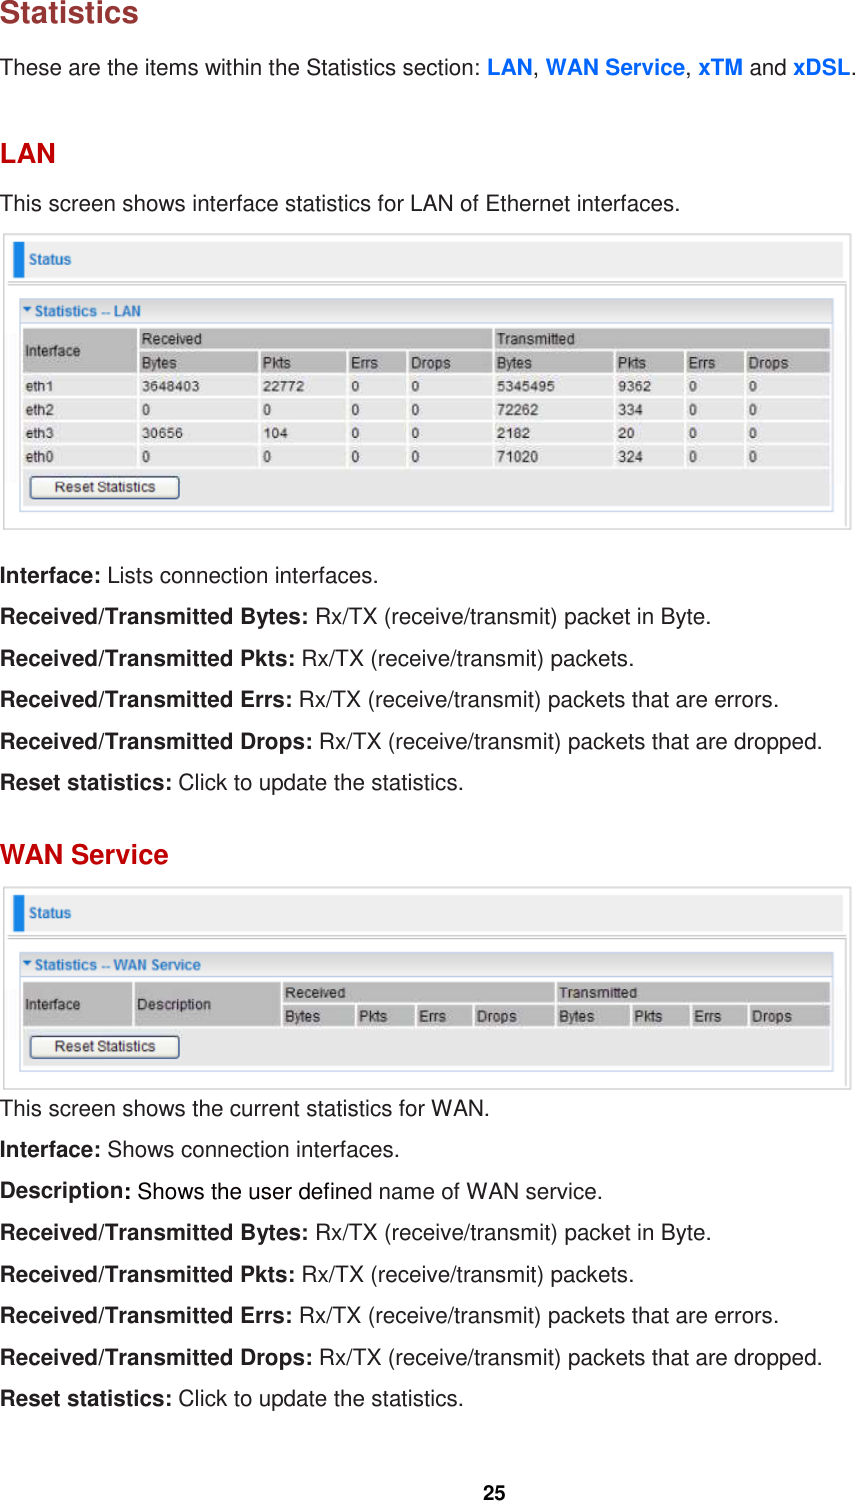  25  Statistics These are the items within the Statistics section: LAN, WAN Service, xTM and xDSL.   LAN This screen shows interface statistics for LAN of Ethernet interfaces.   Interface: Lists connection interfaces.  Received/Transmitted Bytes: Rx/TX (receive/transmit) packet in Byte. Received/Transmitted Pkts: Rx/TX (receive/transmit) packets. Received/Transmitted Errs: Rx/TX (receive/transmit) packets that are errors. Received/Transmitted Drops: Rx/TX (receive/transmit) packets that are dropped. Reset statistics: Click to update the statistics.  WAN Service  This screen shows the current statistics for WAN. Interface: Shows connection interfaces.  Description: Shows the user defined name of WAN service. Received/Transmitted Bytes: Rx/TX (receive/transmit) packet in Byte. Received/Transmitted Pkts: Rx/TX (receive/transmit) packets. Received/Transmitted Errs: Rx/TX (receive/transmit) packets that are errors. Received/Transmitted Drops: Rx/TX (receive/transmit) packets that are dropped. Reset statistics: Click to update the statistics. 